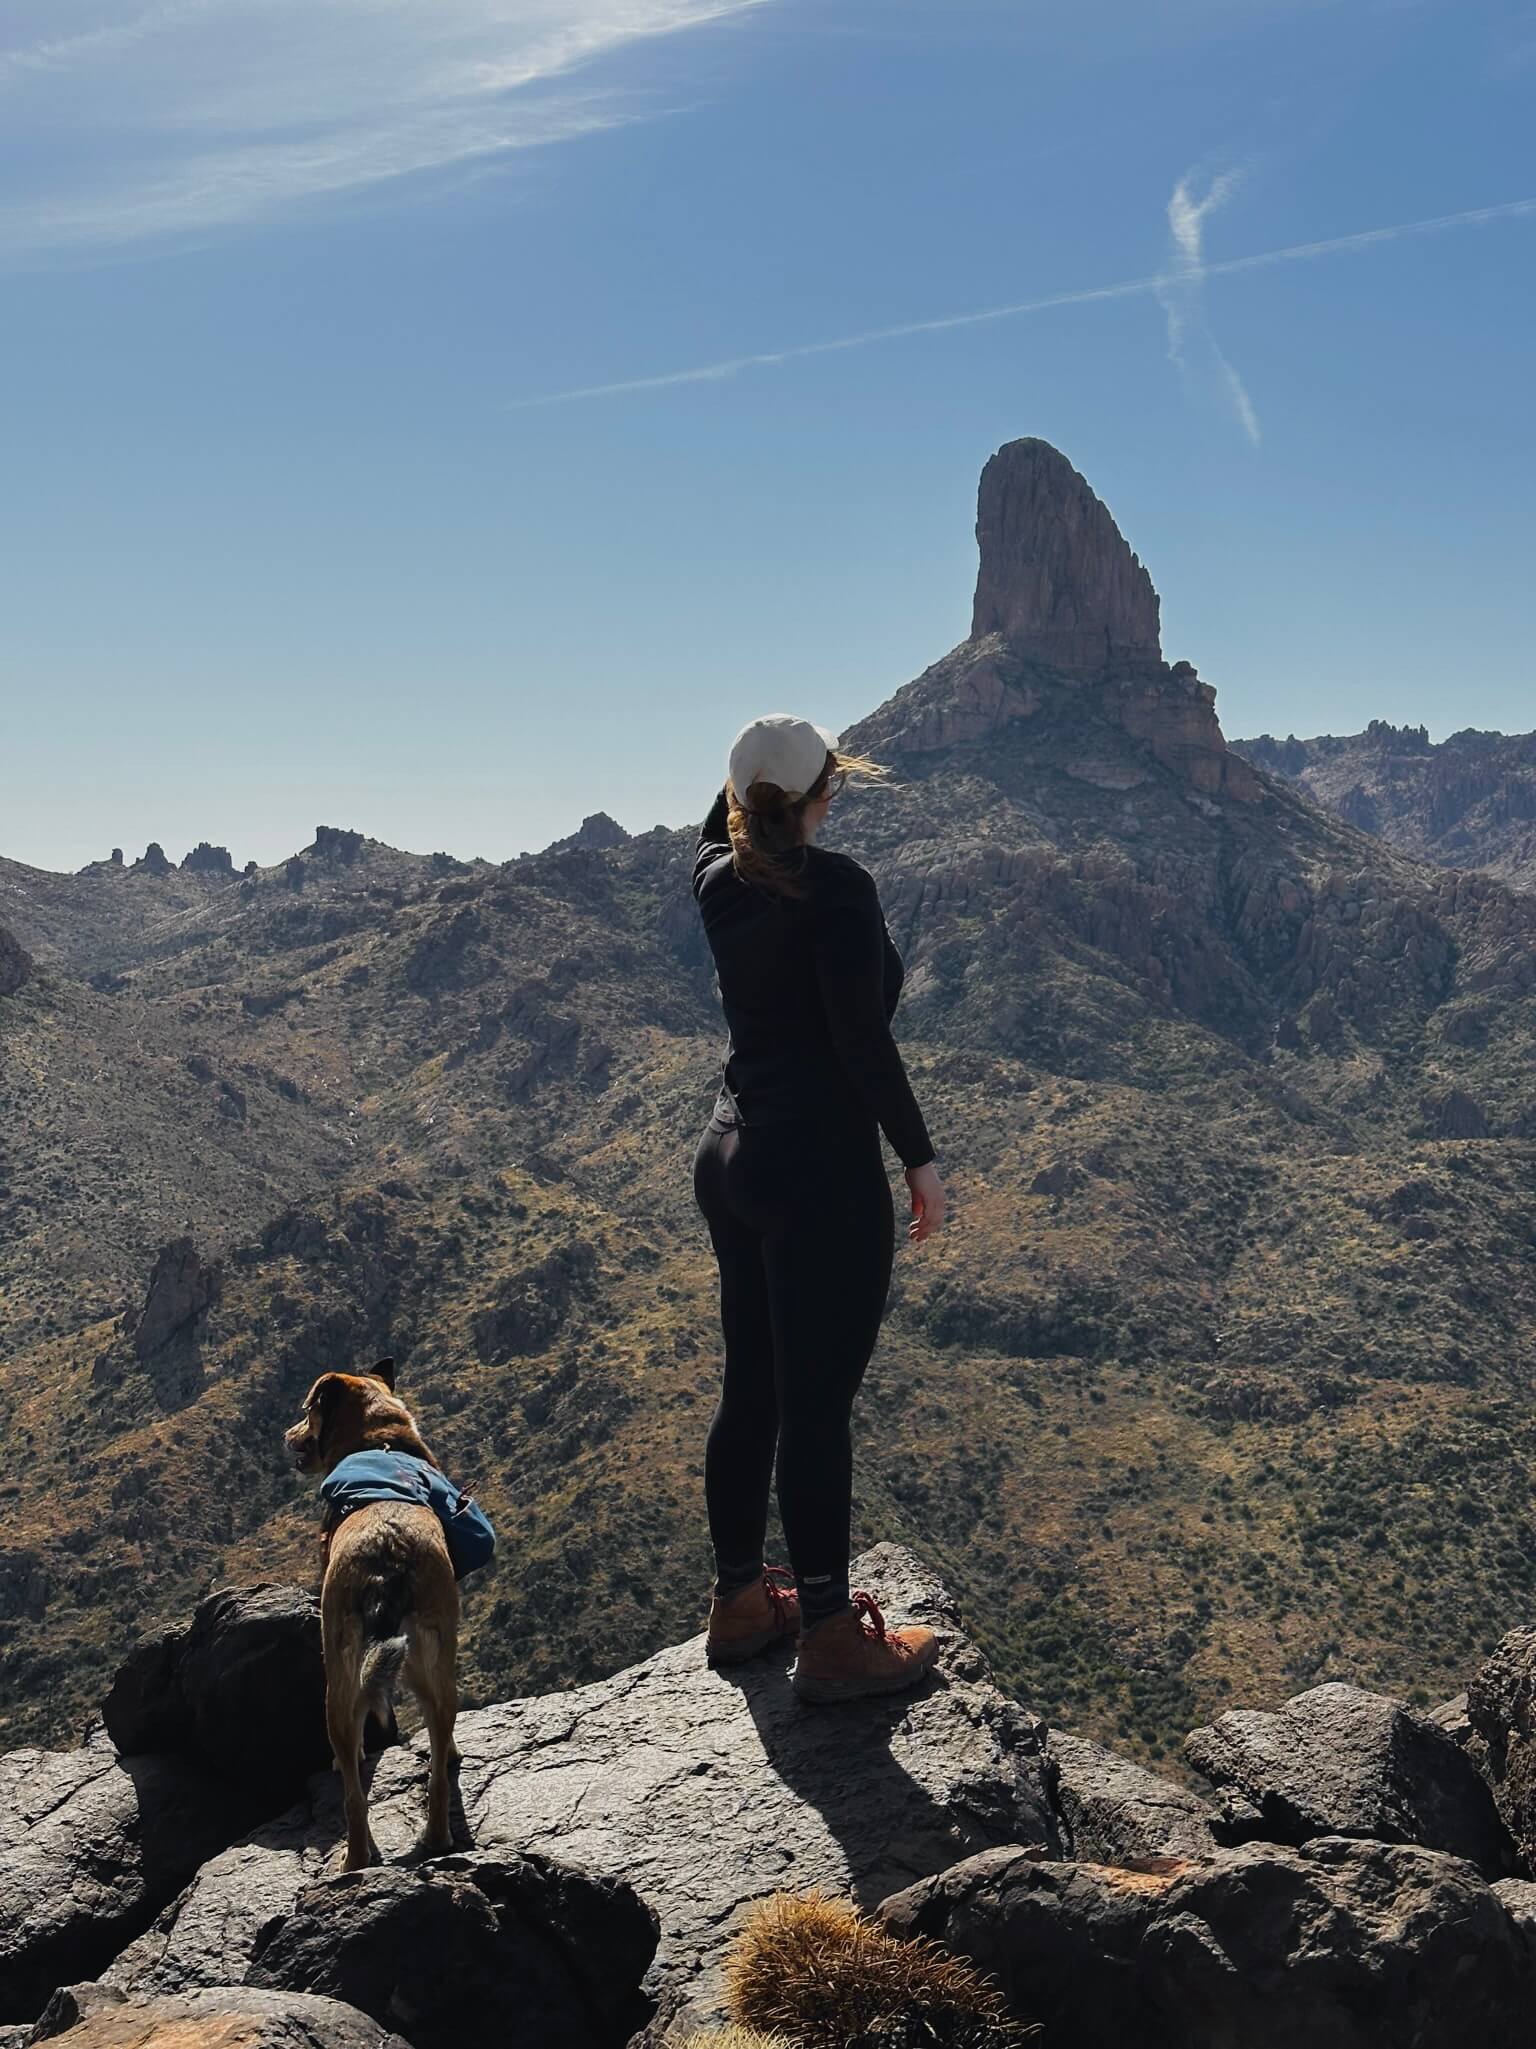 Girl in Black Looking out on the Mountains with a Small Dog